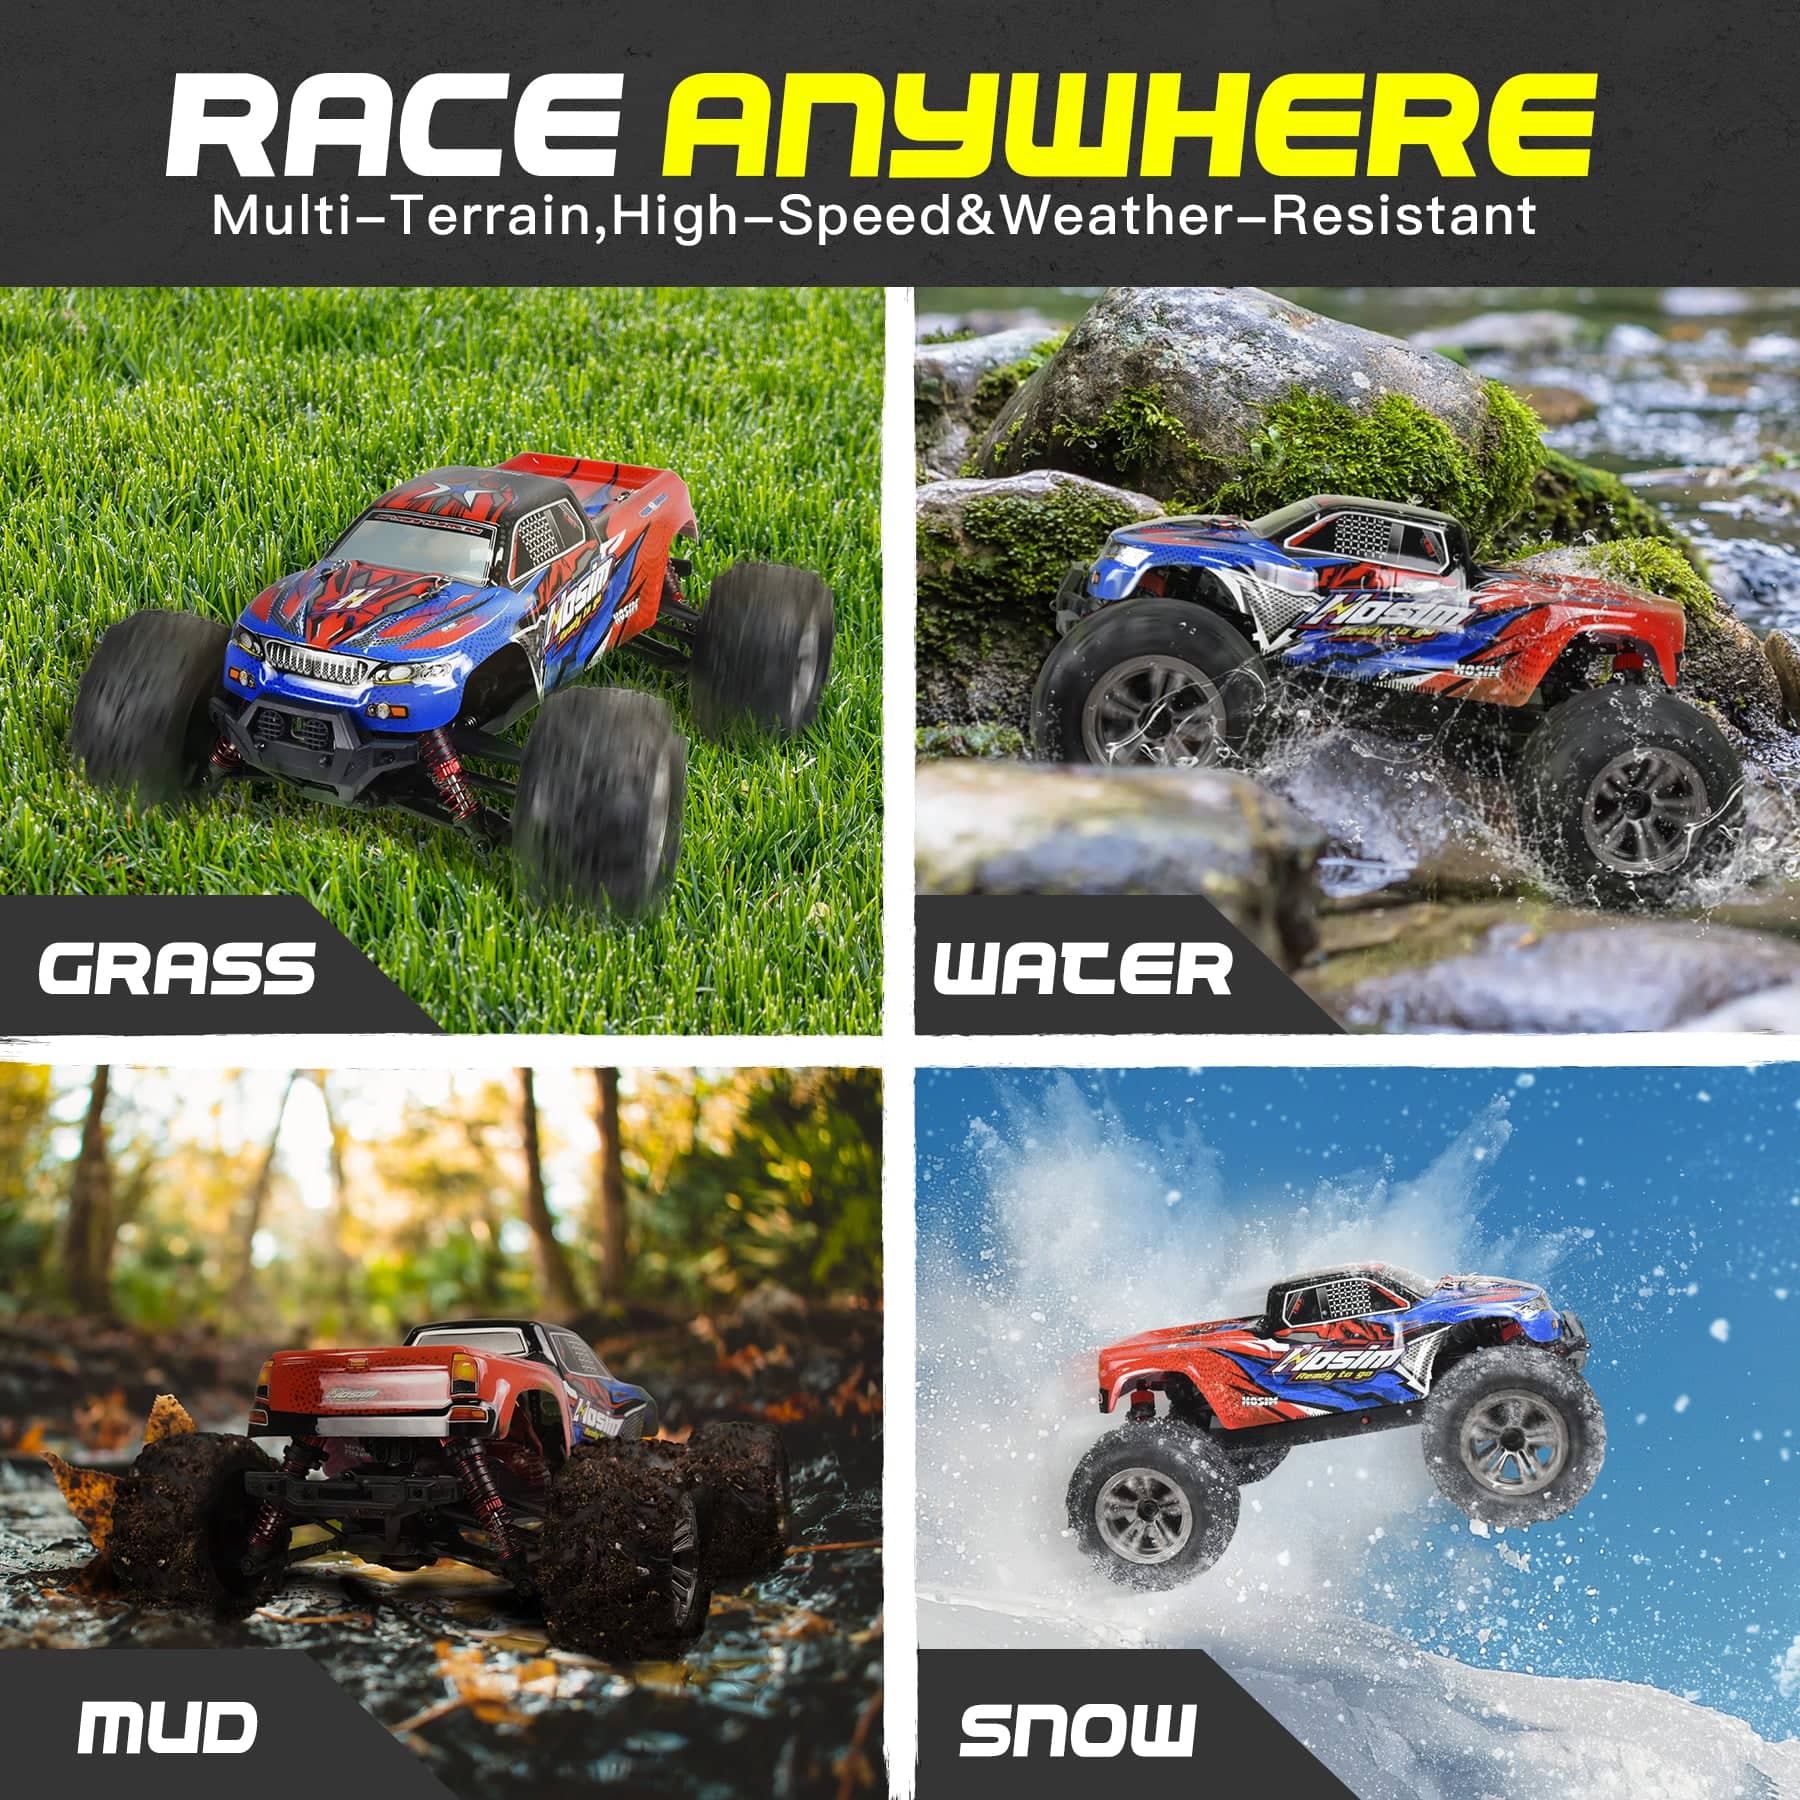 Hosim 1:16 RC Cars 36+KPH All Terrain 4WD Off Road RC Monster Truck Vehiclefor Boys Kids and Adults (New Car Shell Red)